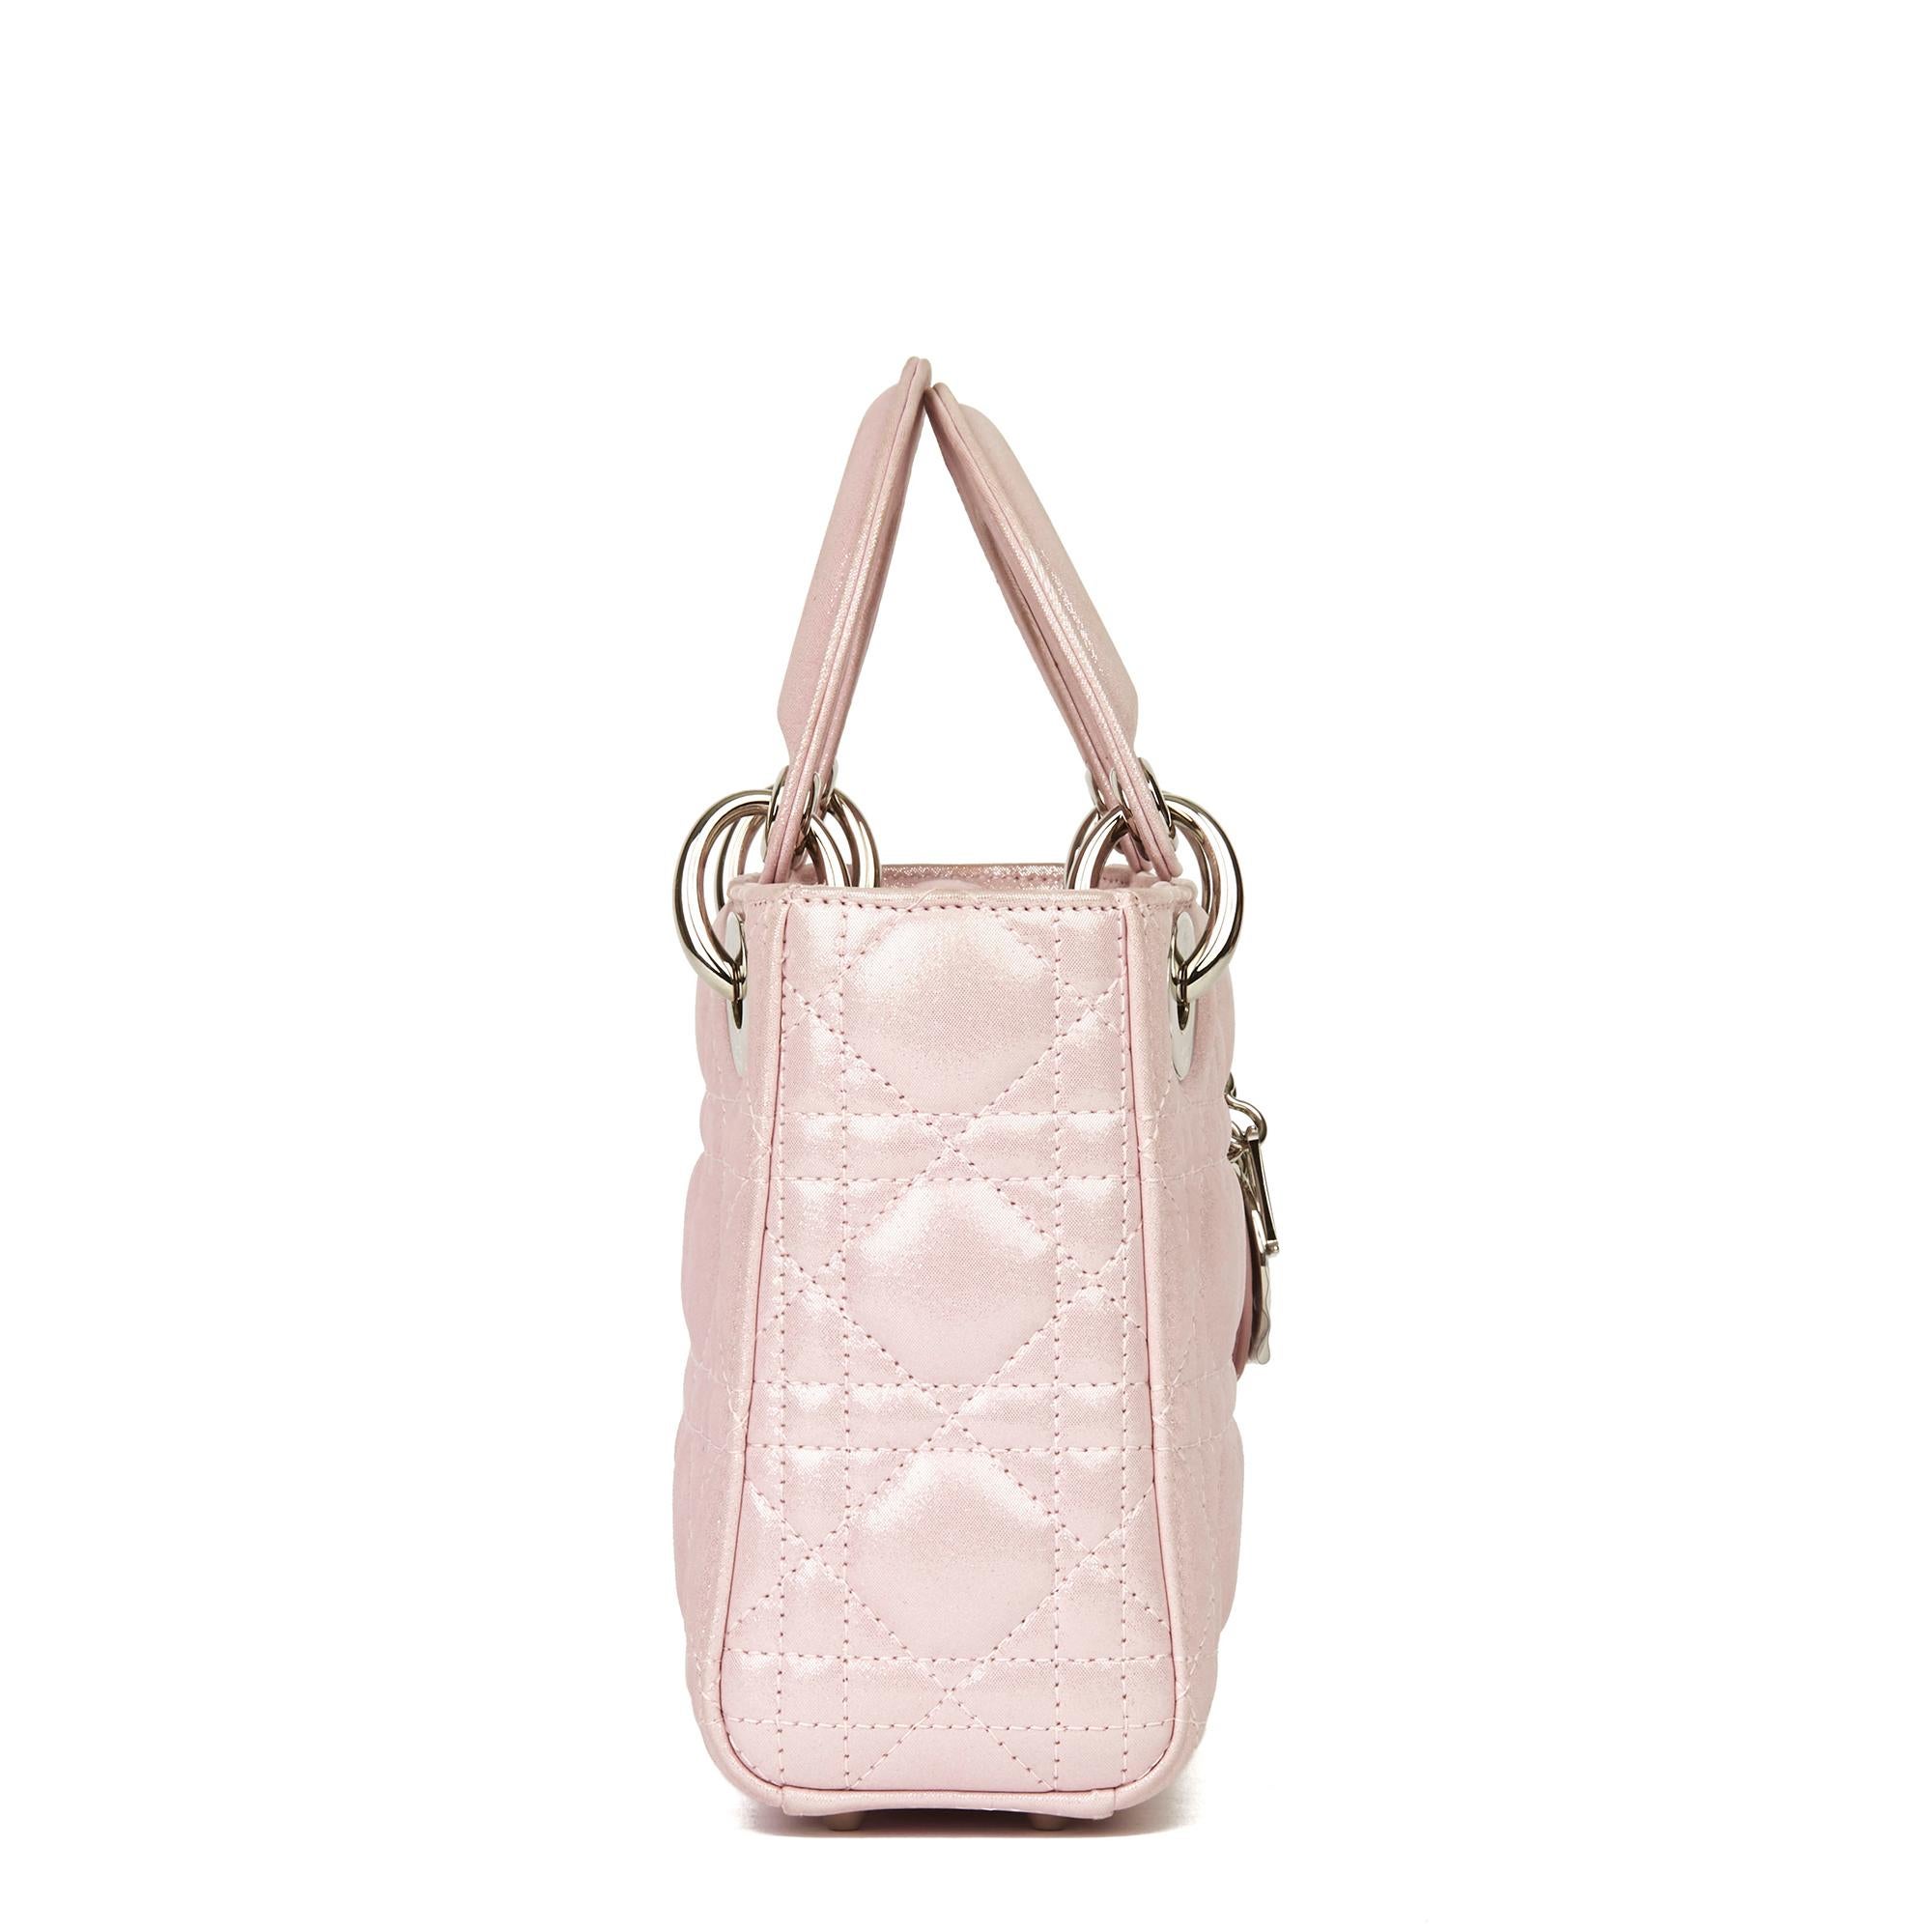 CHRISTIAN DIOR
Pink Quilted Metallic Calfskin Leather Mini Lady Dior

Xupes Reference: HB2983
Serial Number: 15-BO-1105
Age (Circa): 2015
Accompanied By: Dior Dust Bag, Shoulder Strap
Authenticity Details: Date Stamp (Made in Italy)
Gender: